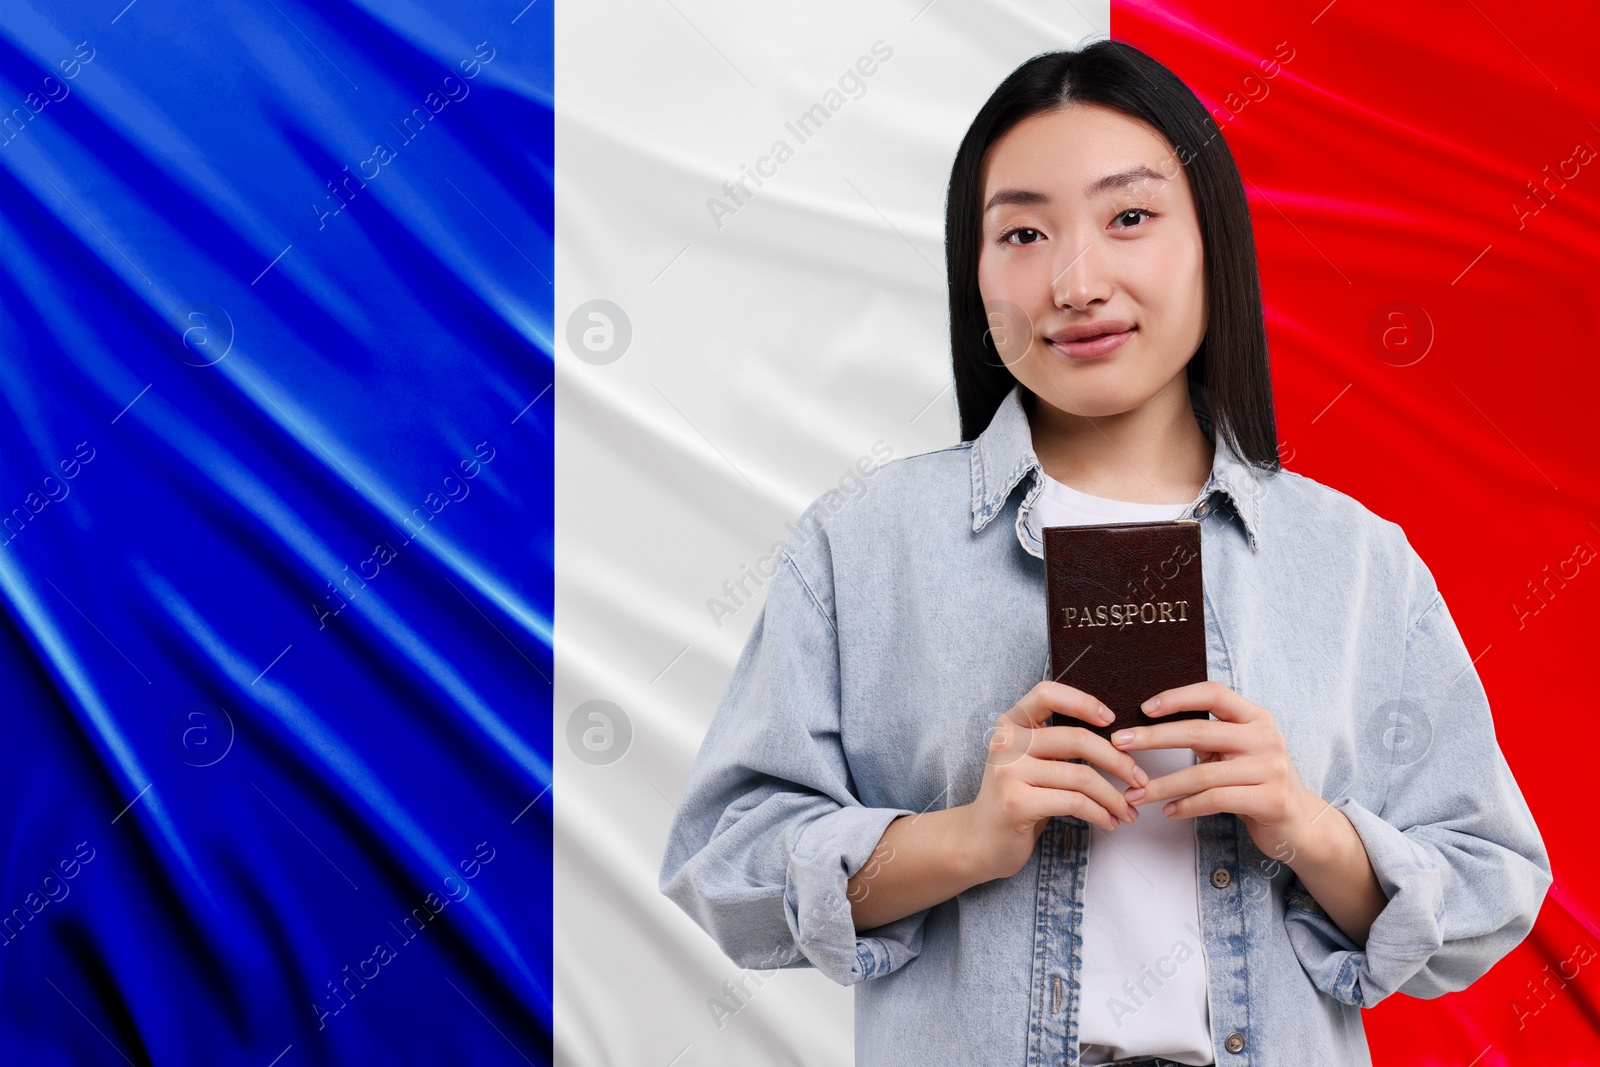 Image of Immigration. Woman with passport against national flag of France, space for text